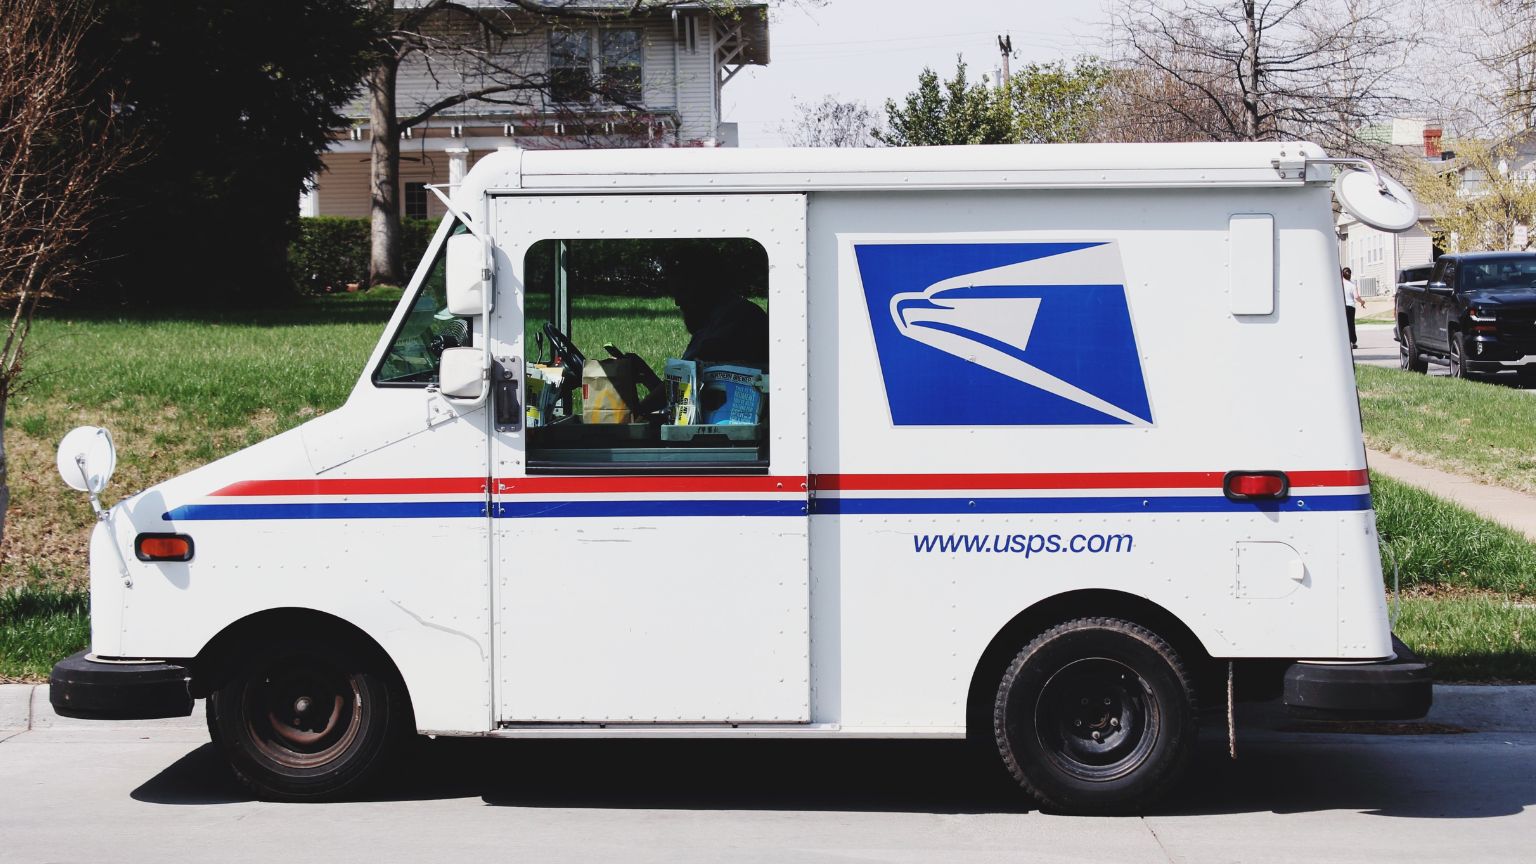 USPS used online surveillance to spy on protesters